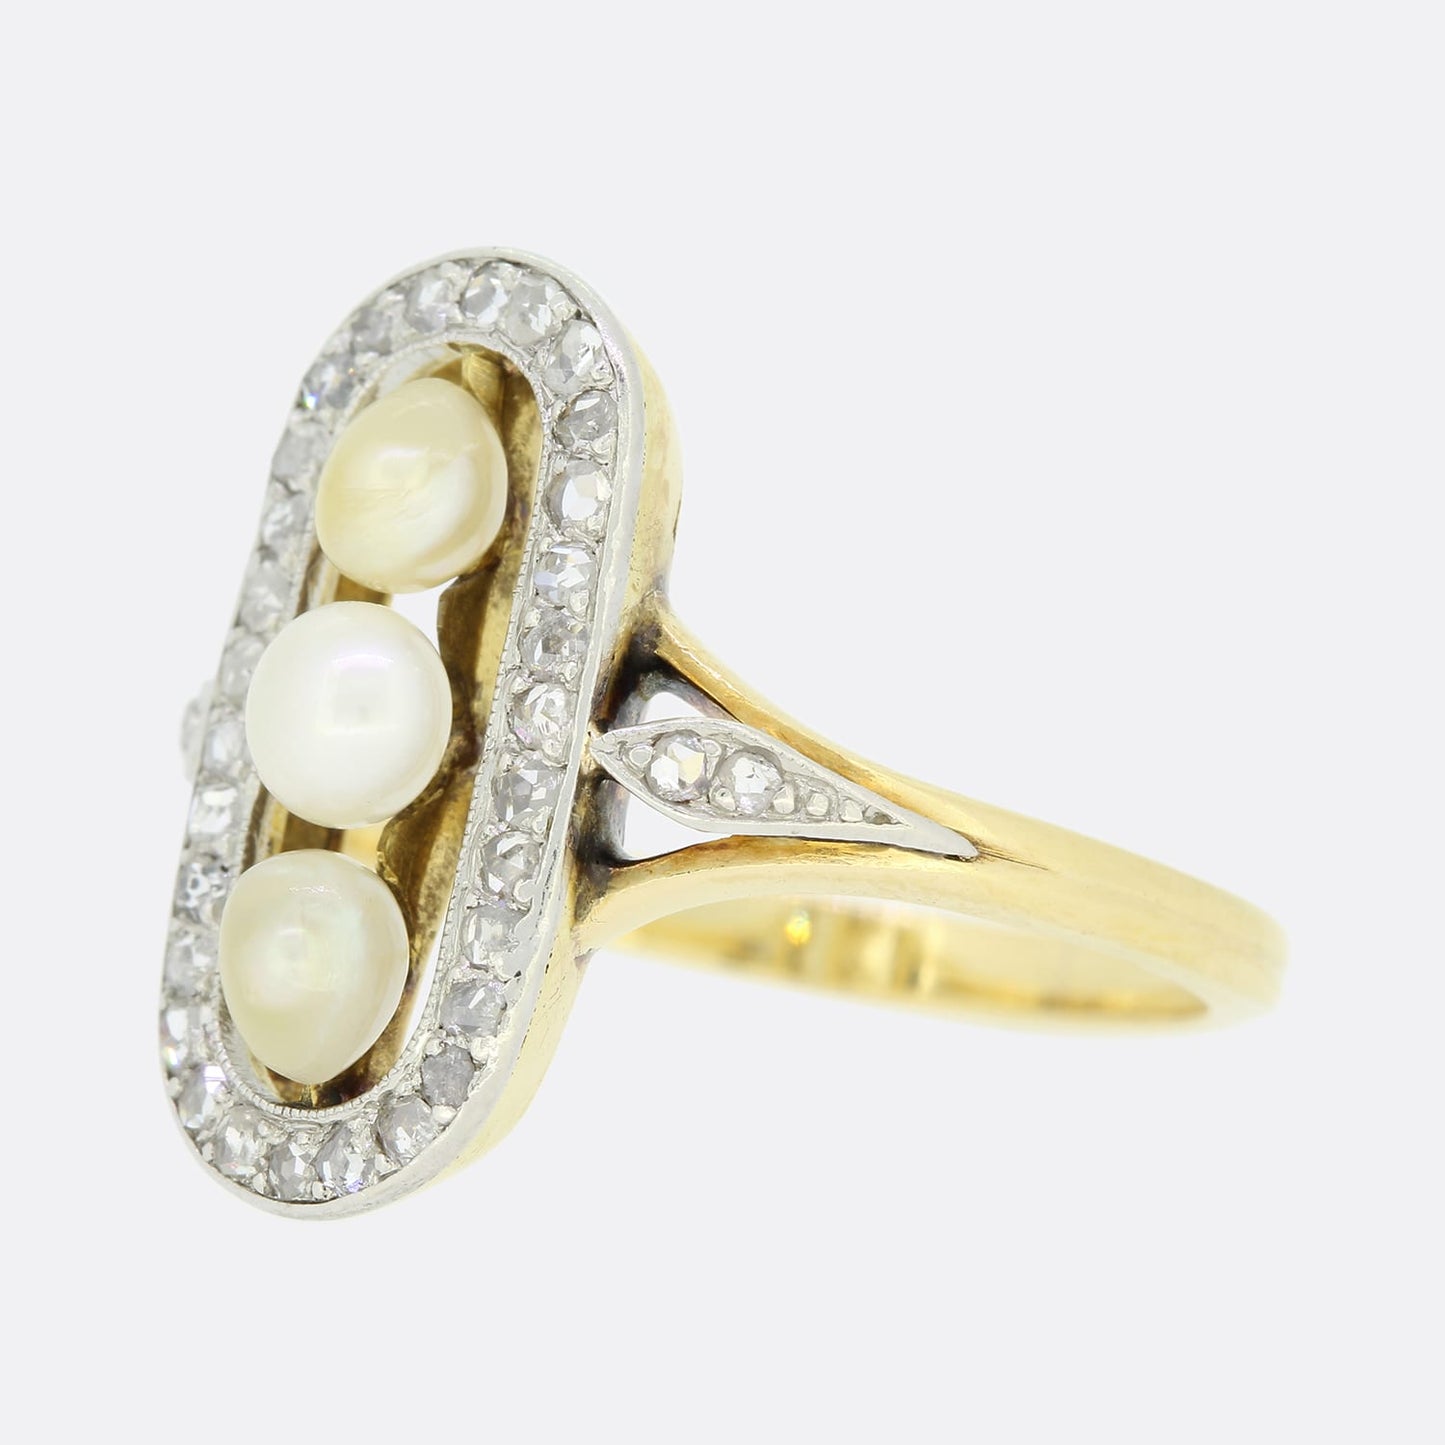 Edwardian Pearl and Diamond Tablet Ring